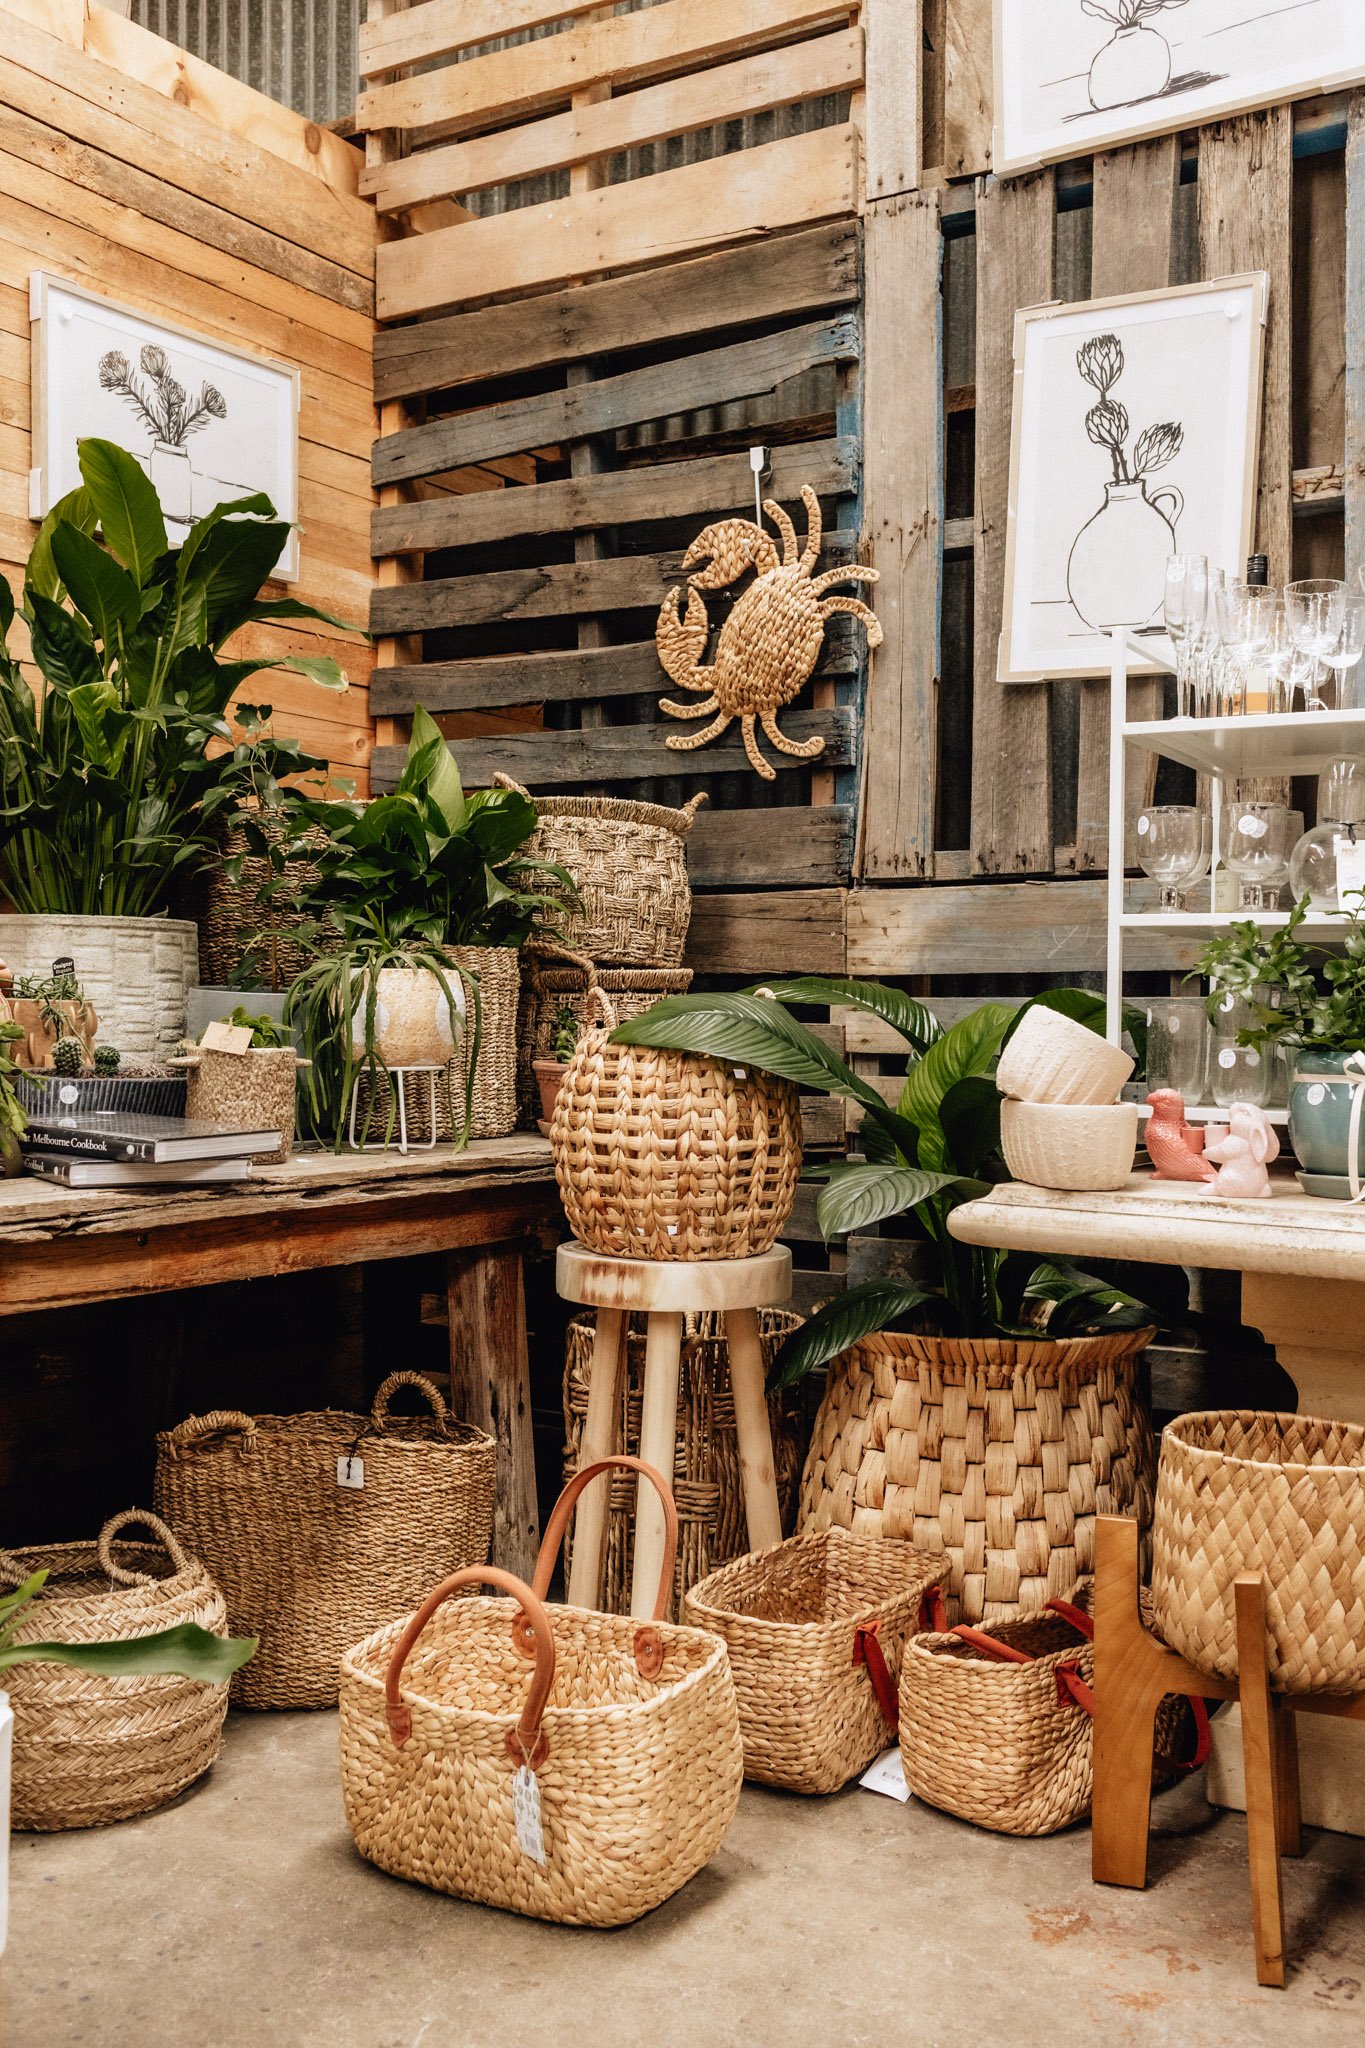 plants and ceramics at as daisy does geelong store.jpg